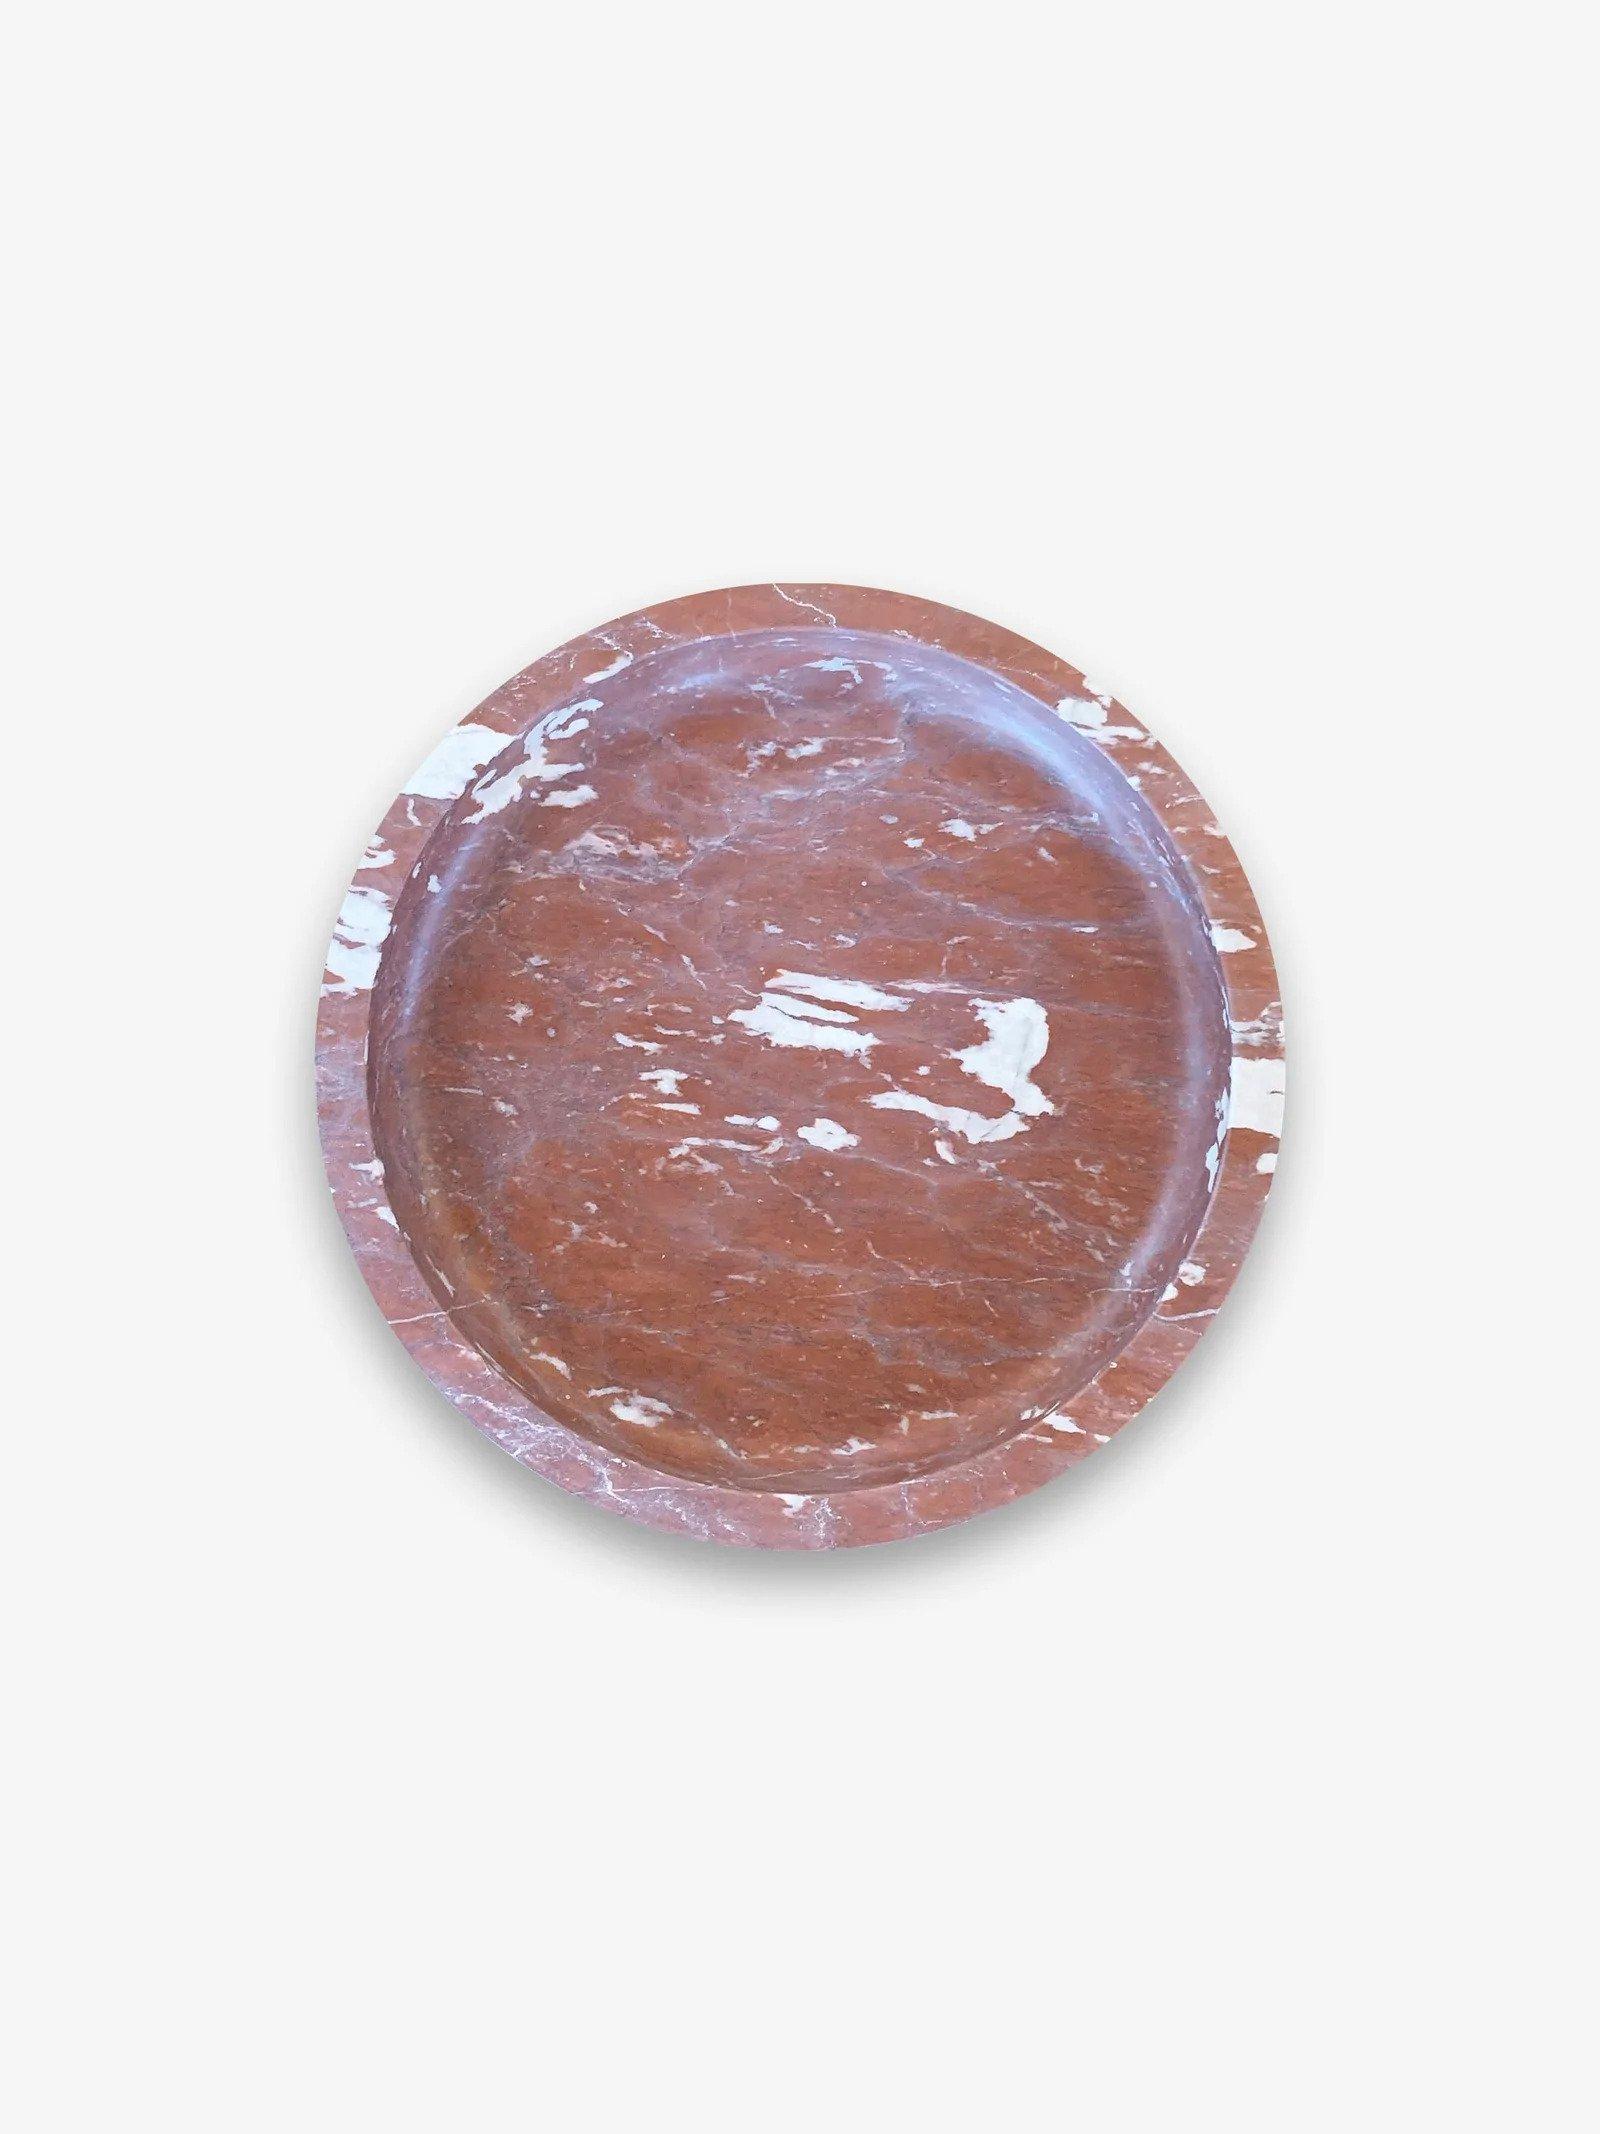 Simple display with cunning execution. The Komm Bowl from Michael Verheyden is an ordinary object that would be the perfect finishing piece to any countertop or table. This Komm bowl is made in beautiful Rosso Francia, a red marble only quarried in